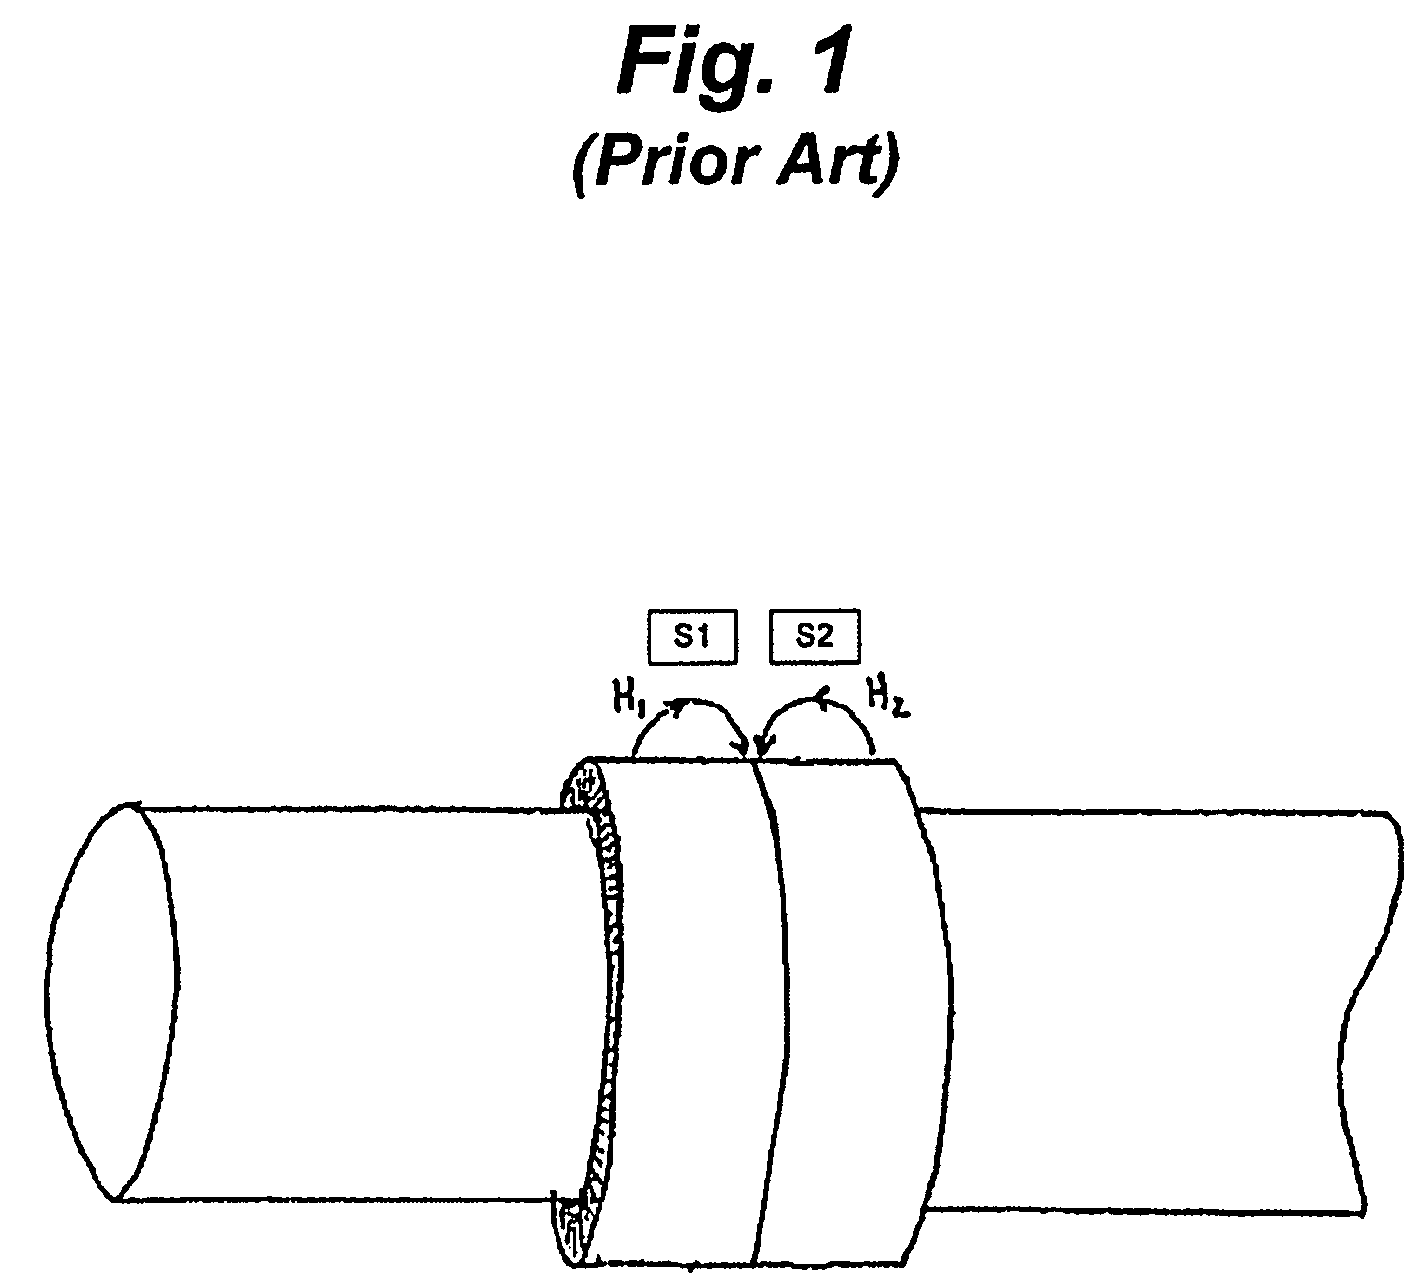 Reduced axial movement error in a torque-sensing system